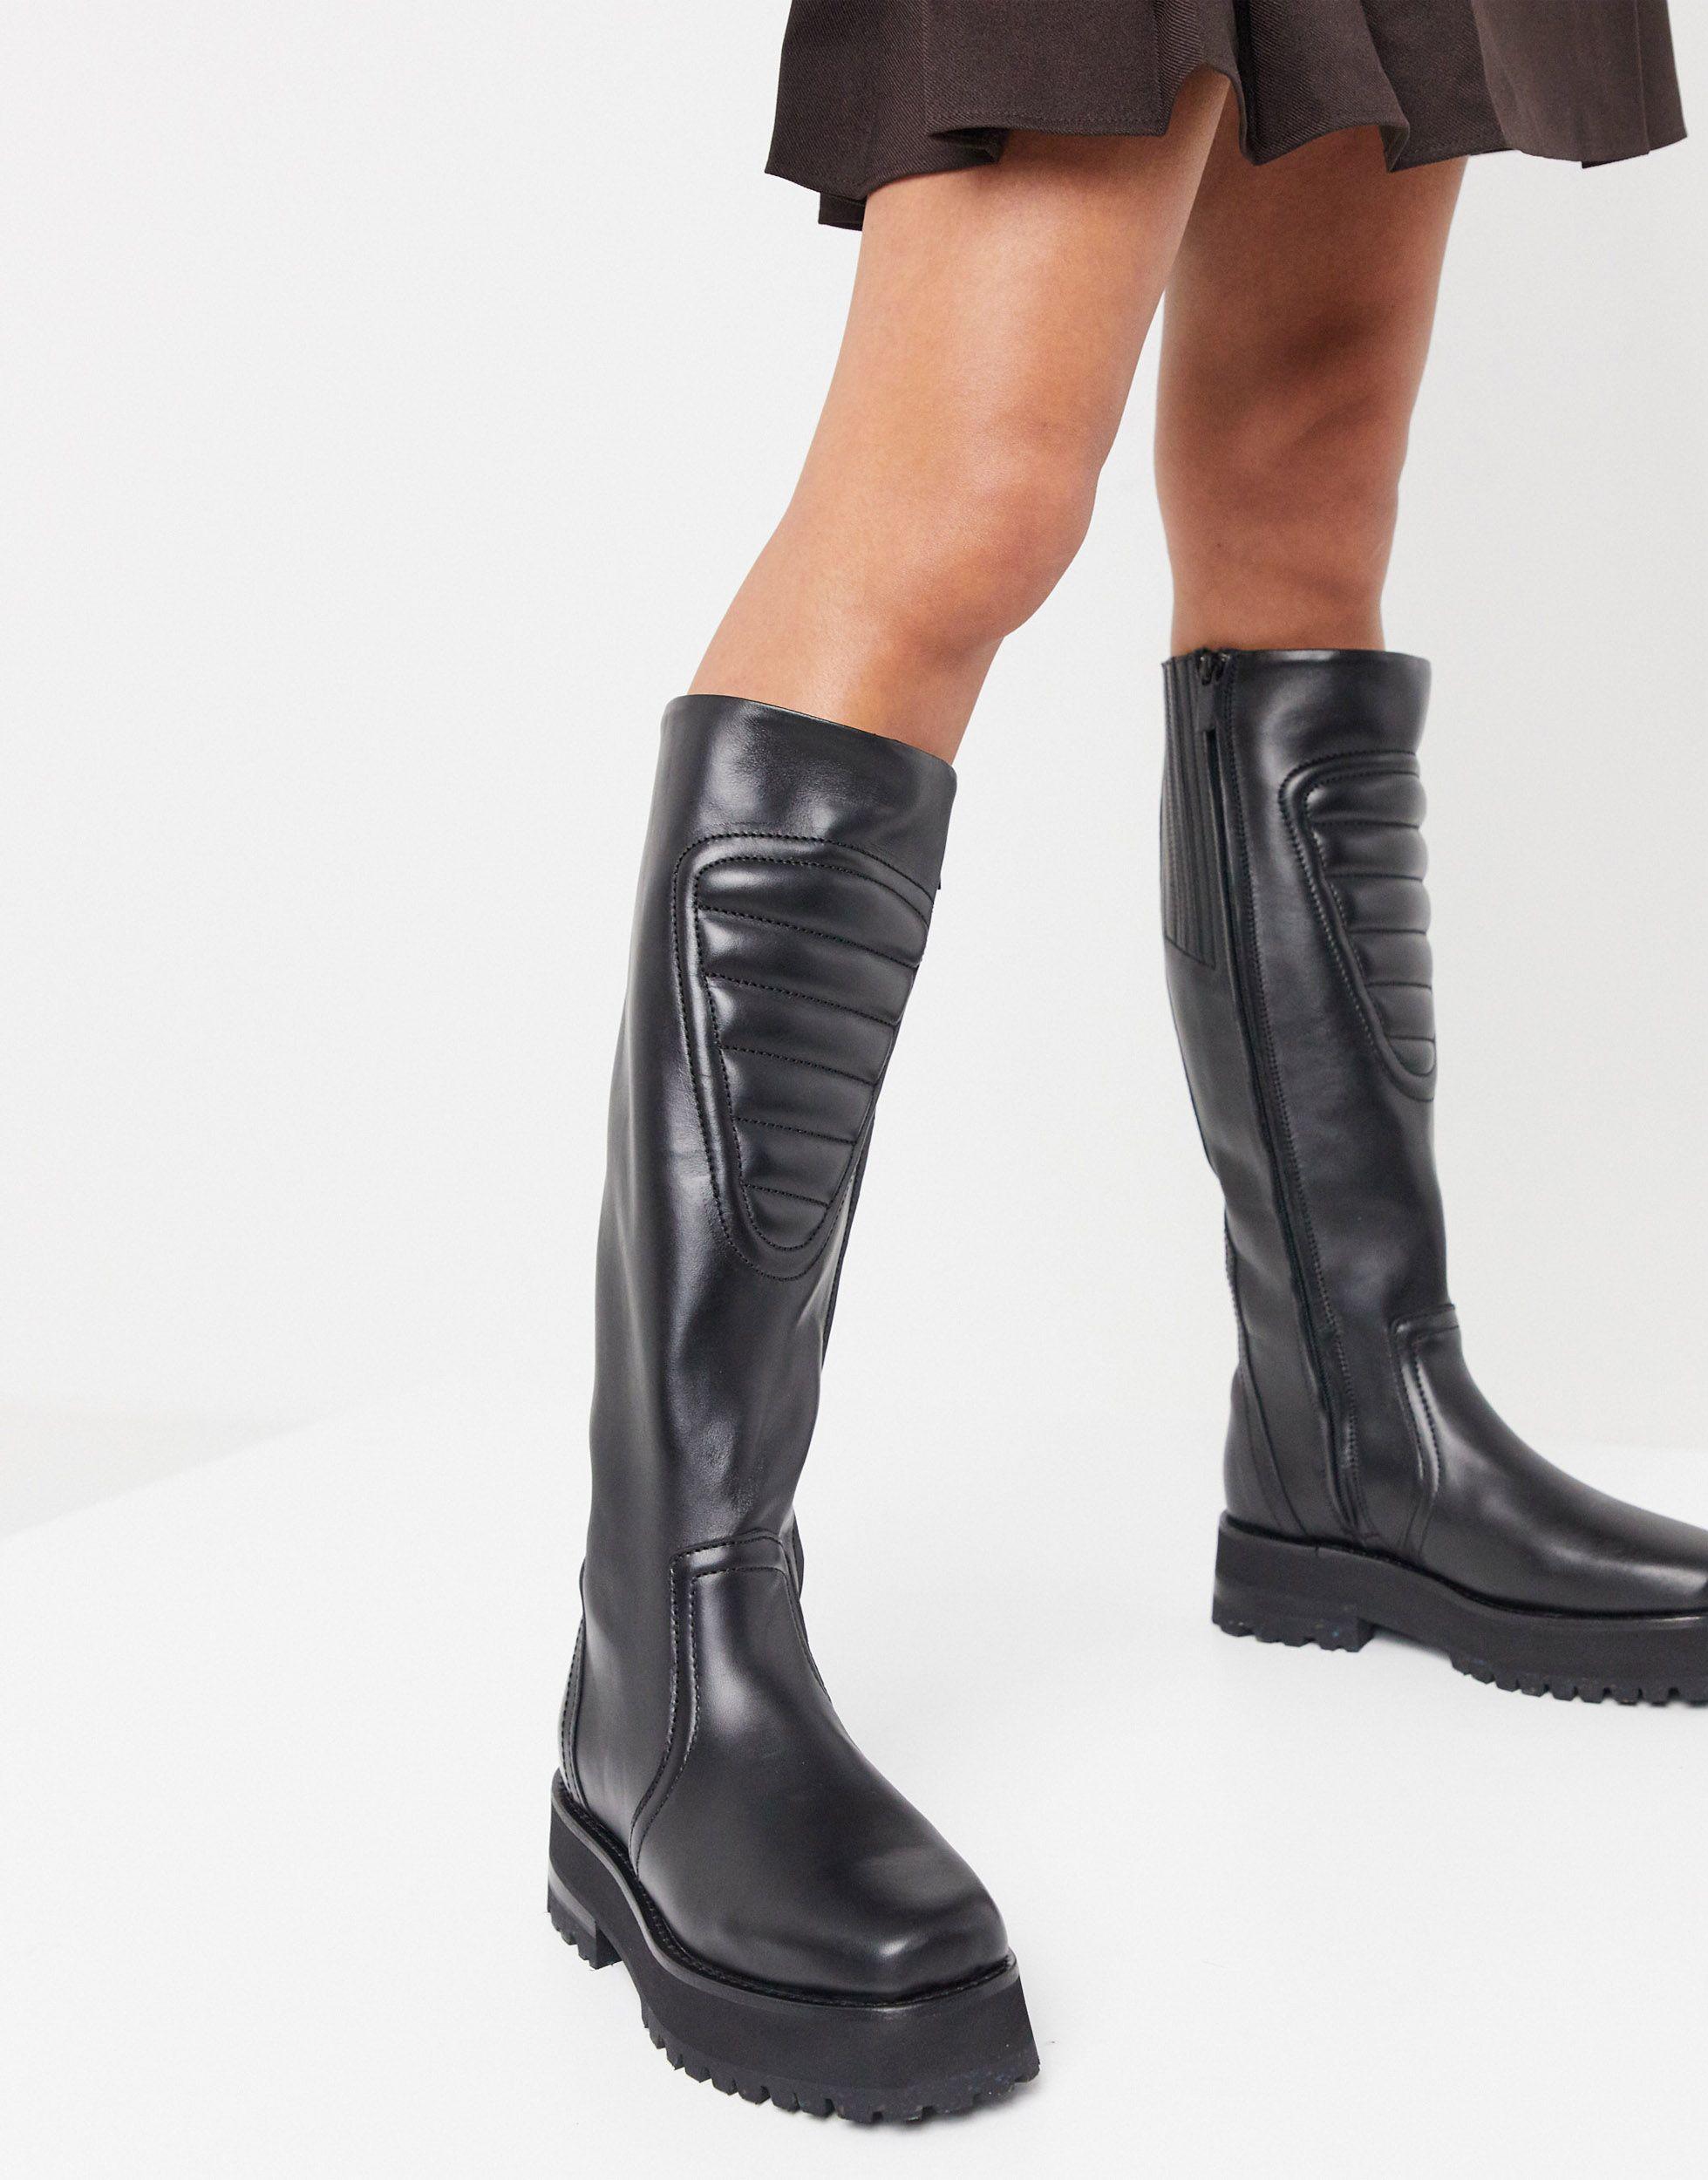 Buy > forever 21 boots india > in stock